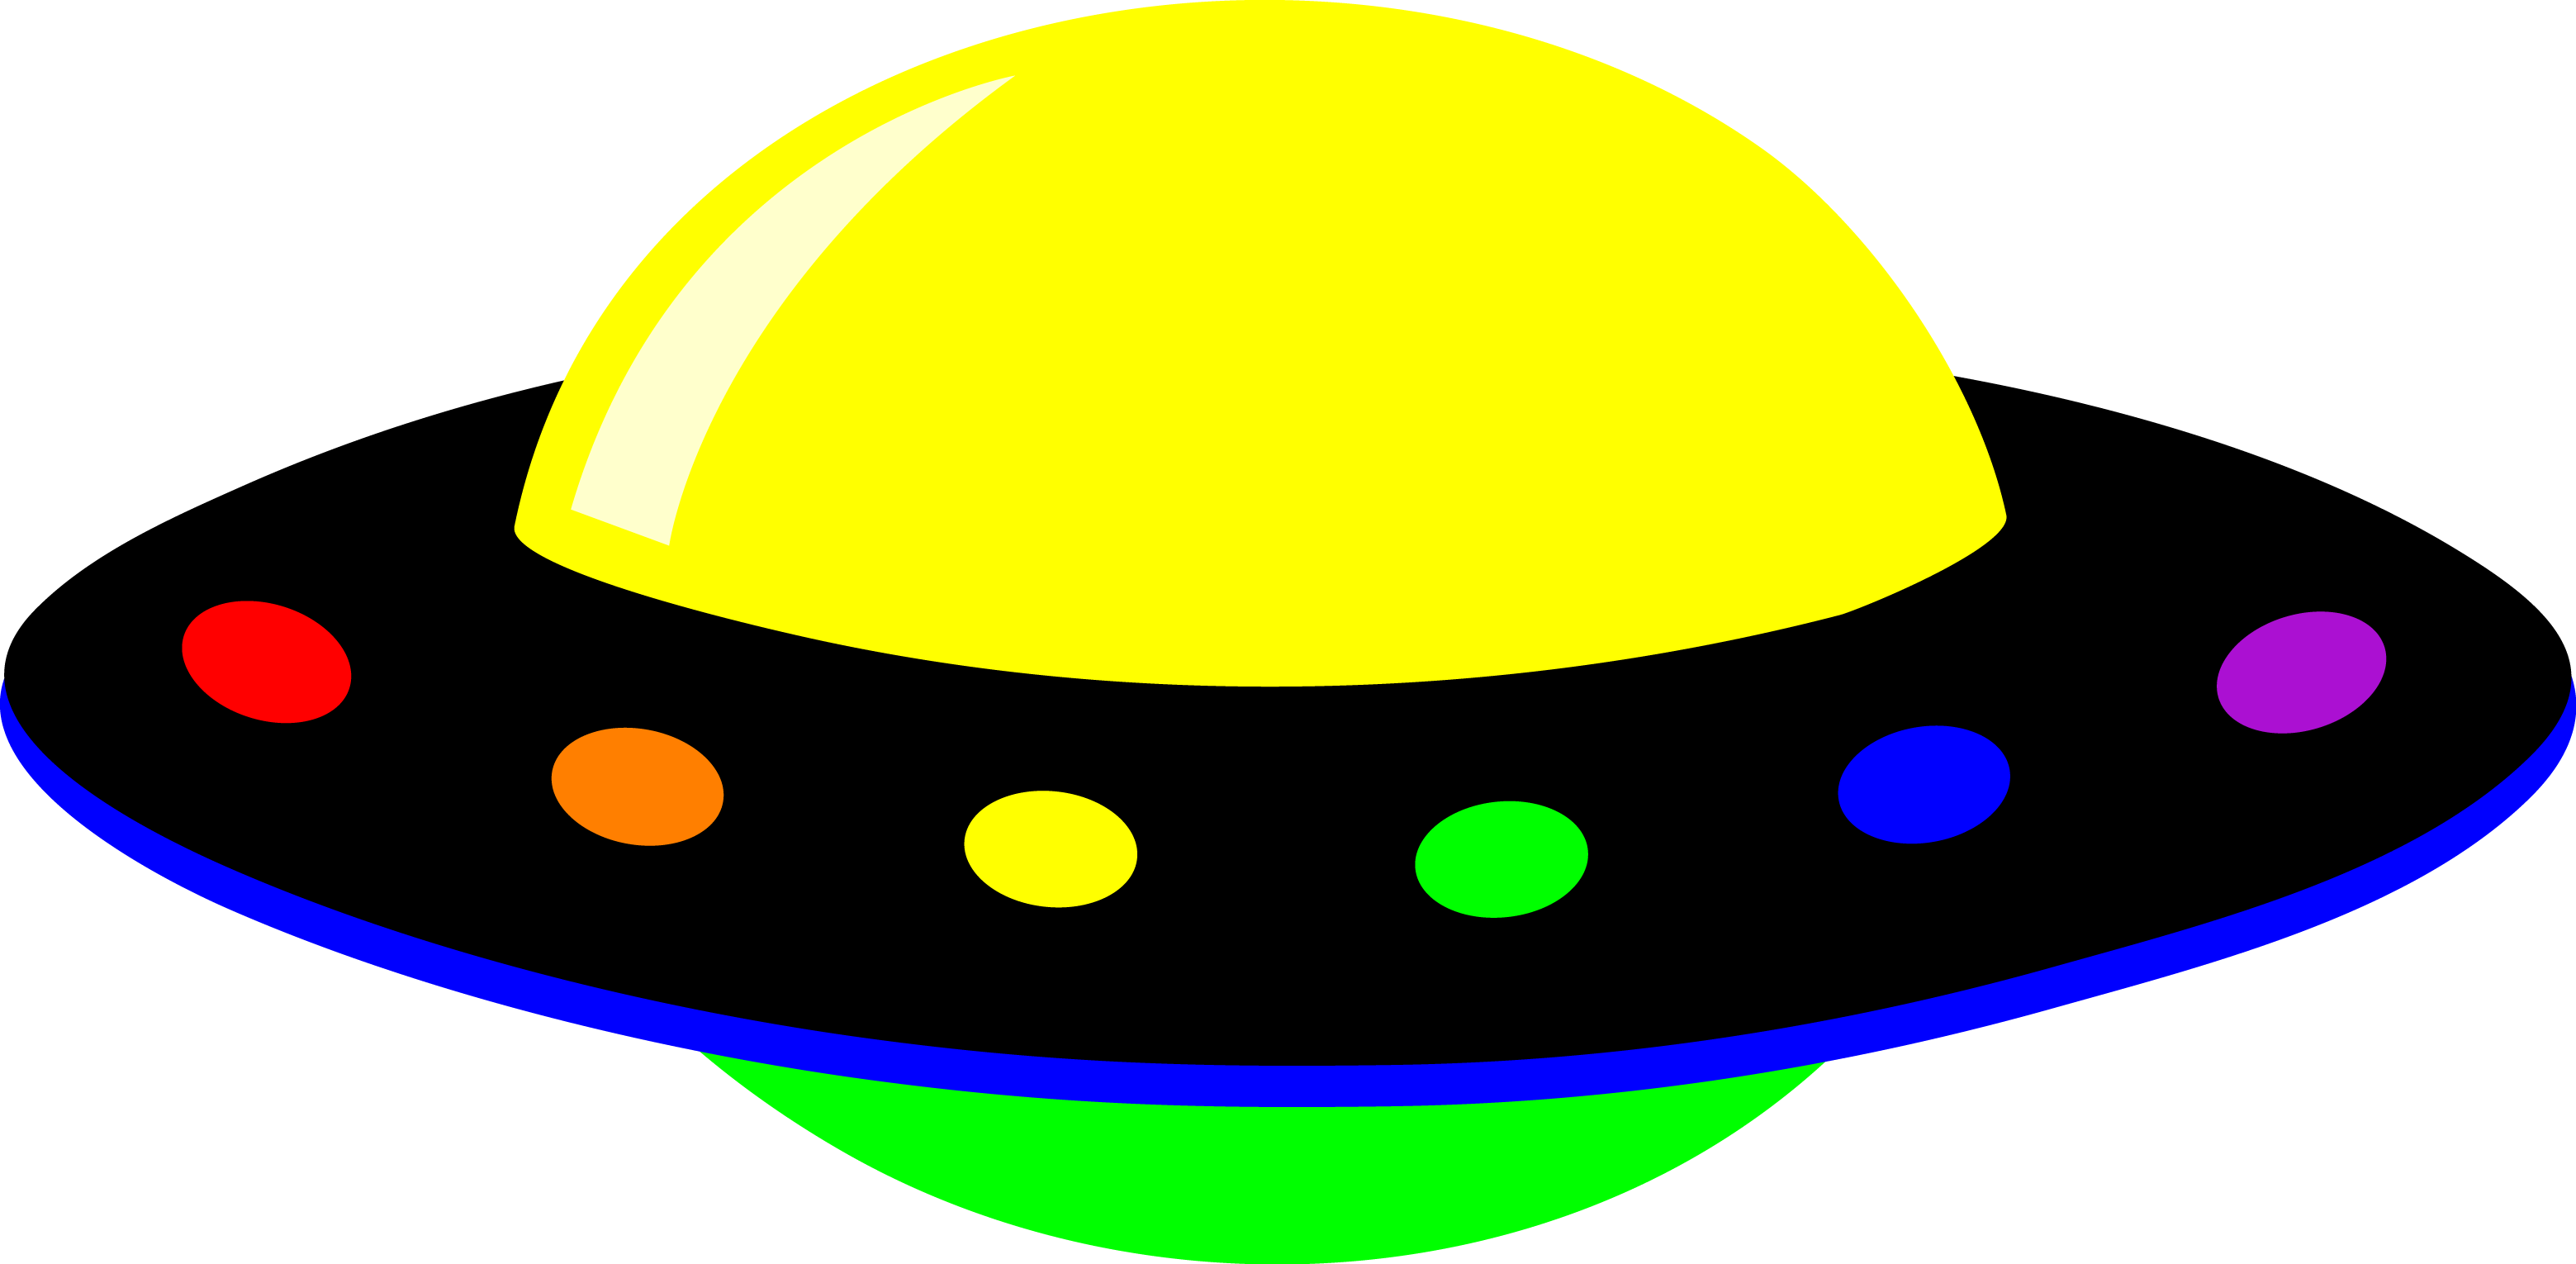 Spaceship 20clipart | Clipart Panda - Free Clipart Images